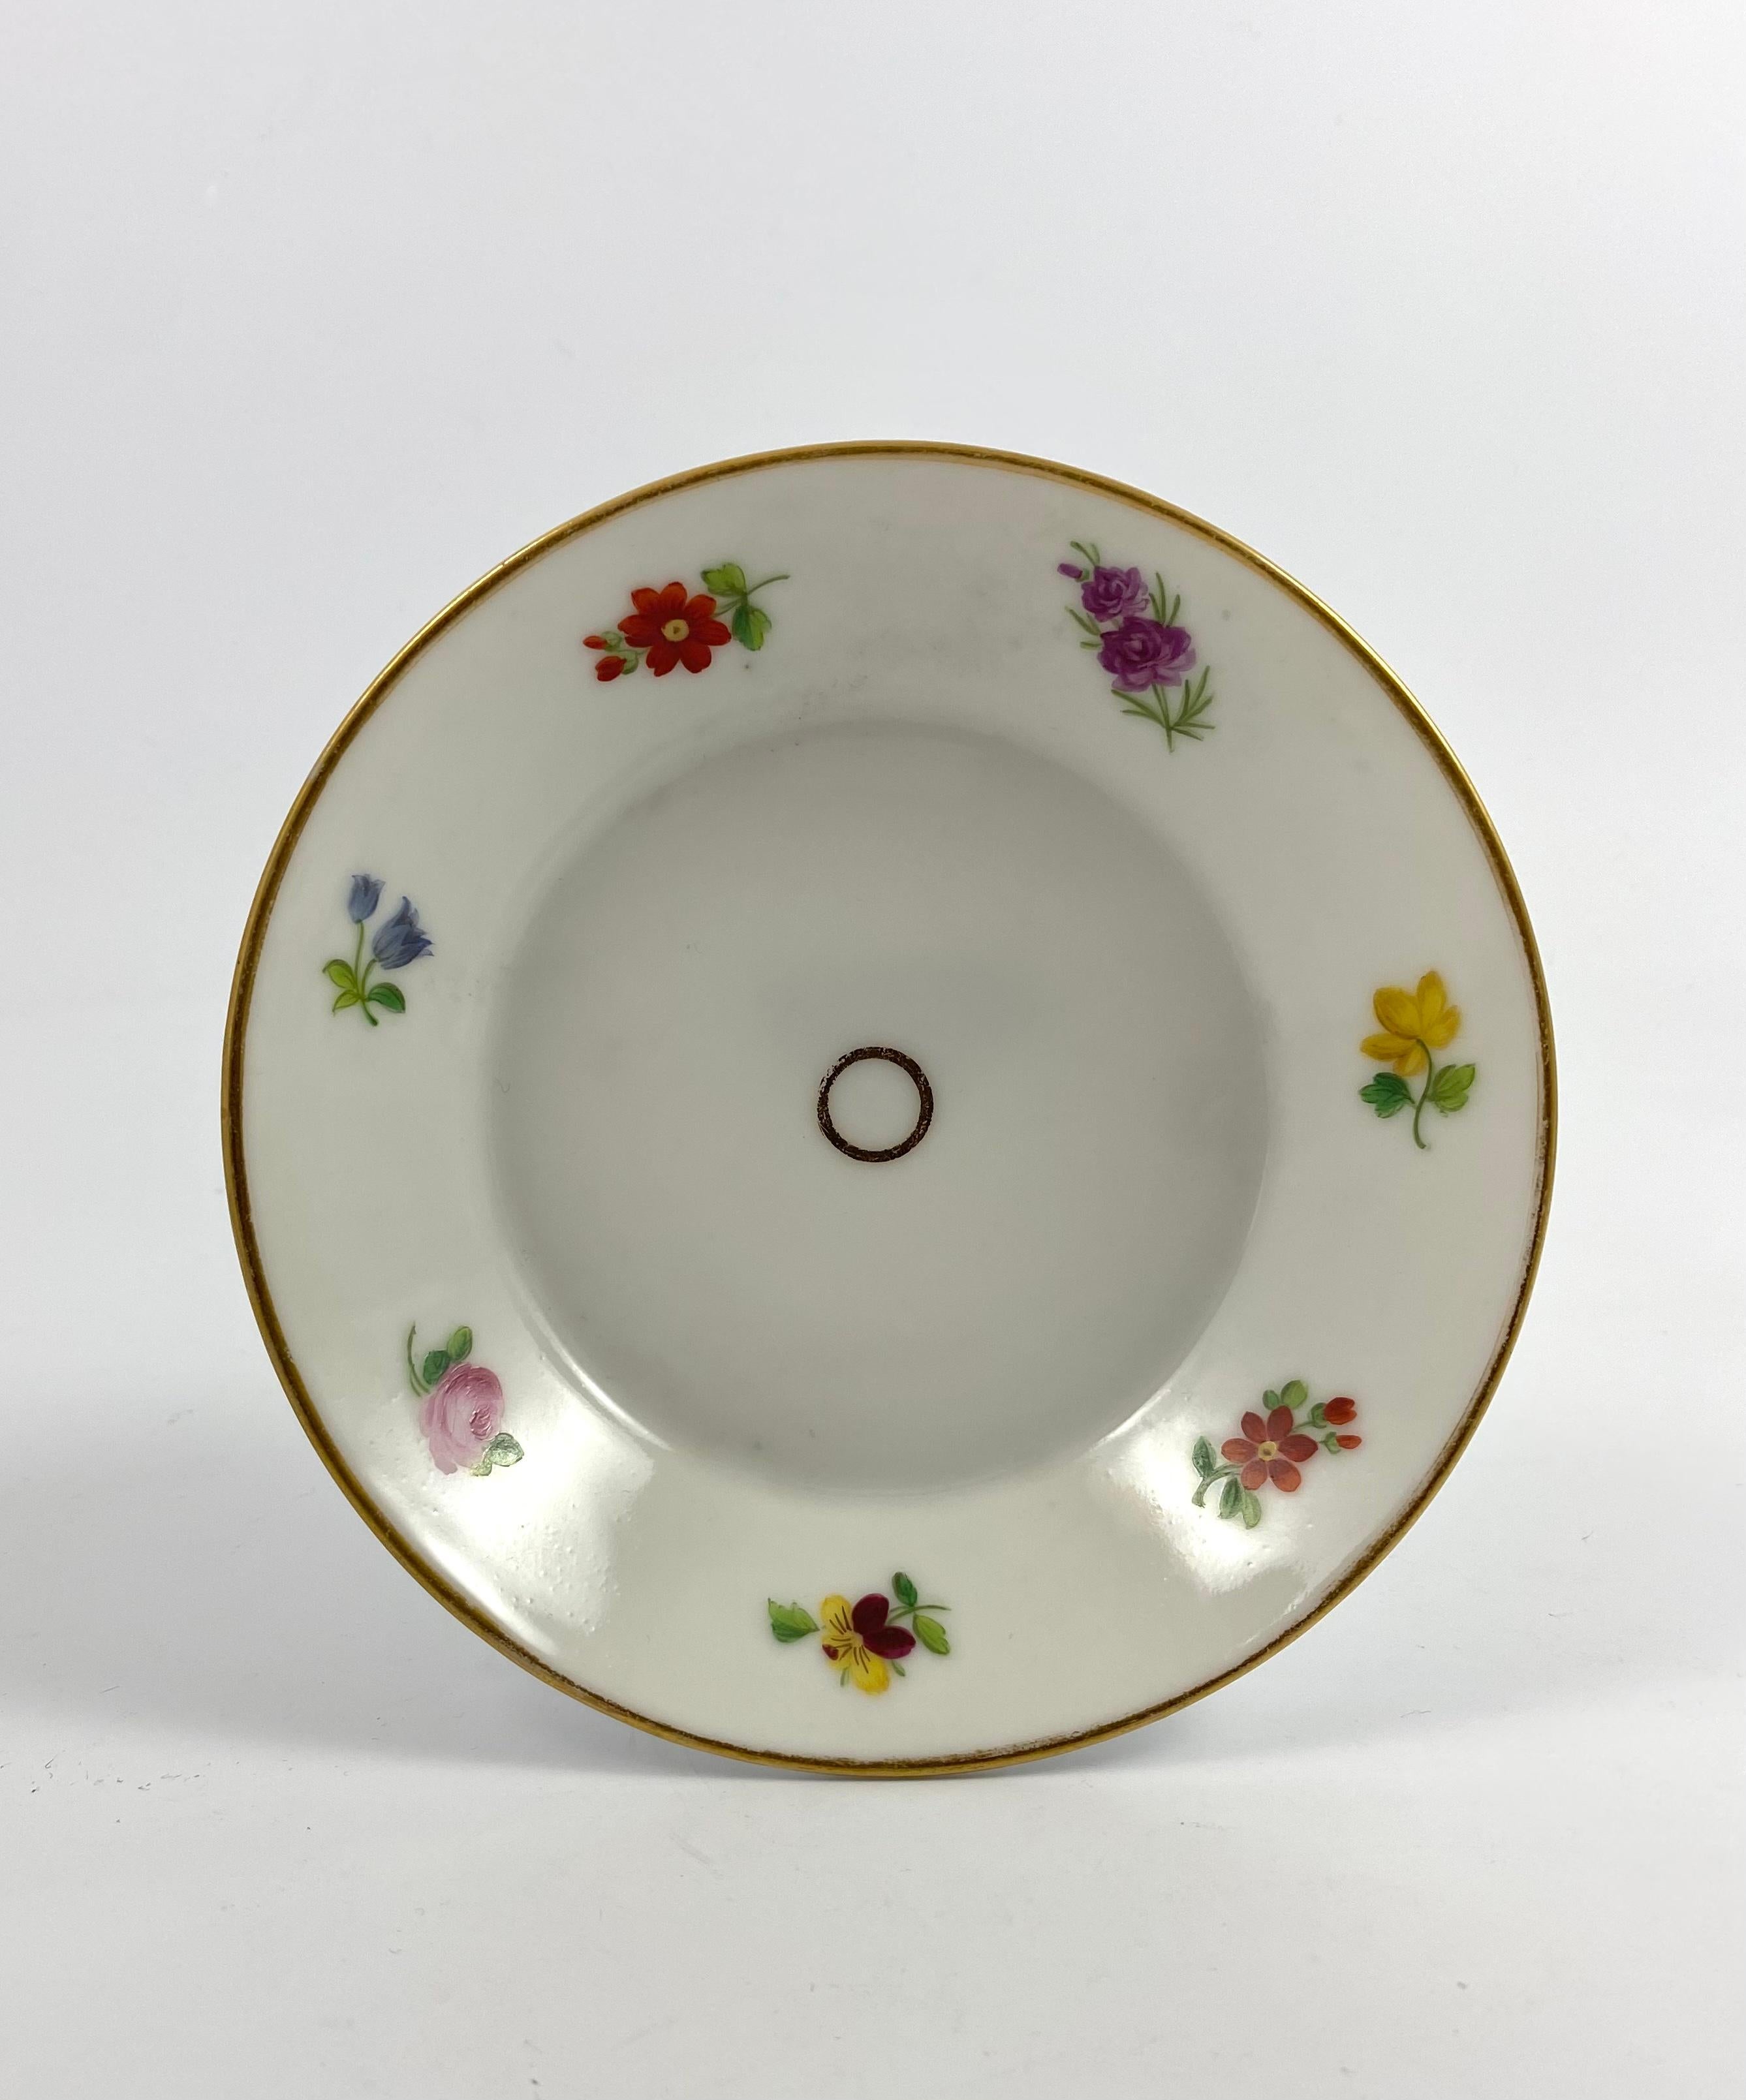 Paris porcelain coffee can and saucer, c. 1830. The coffee can painted with a large spray of flowers, with smaller sprigs around the rest of the can, between gilt lines. Similar decoration to the saucer.
Measures: Height of can – 7 cm, 2